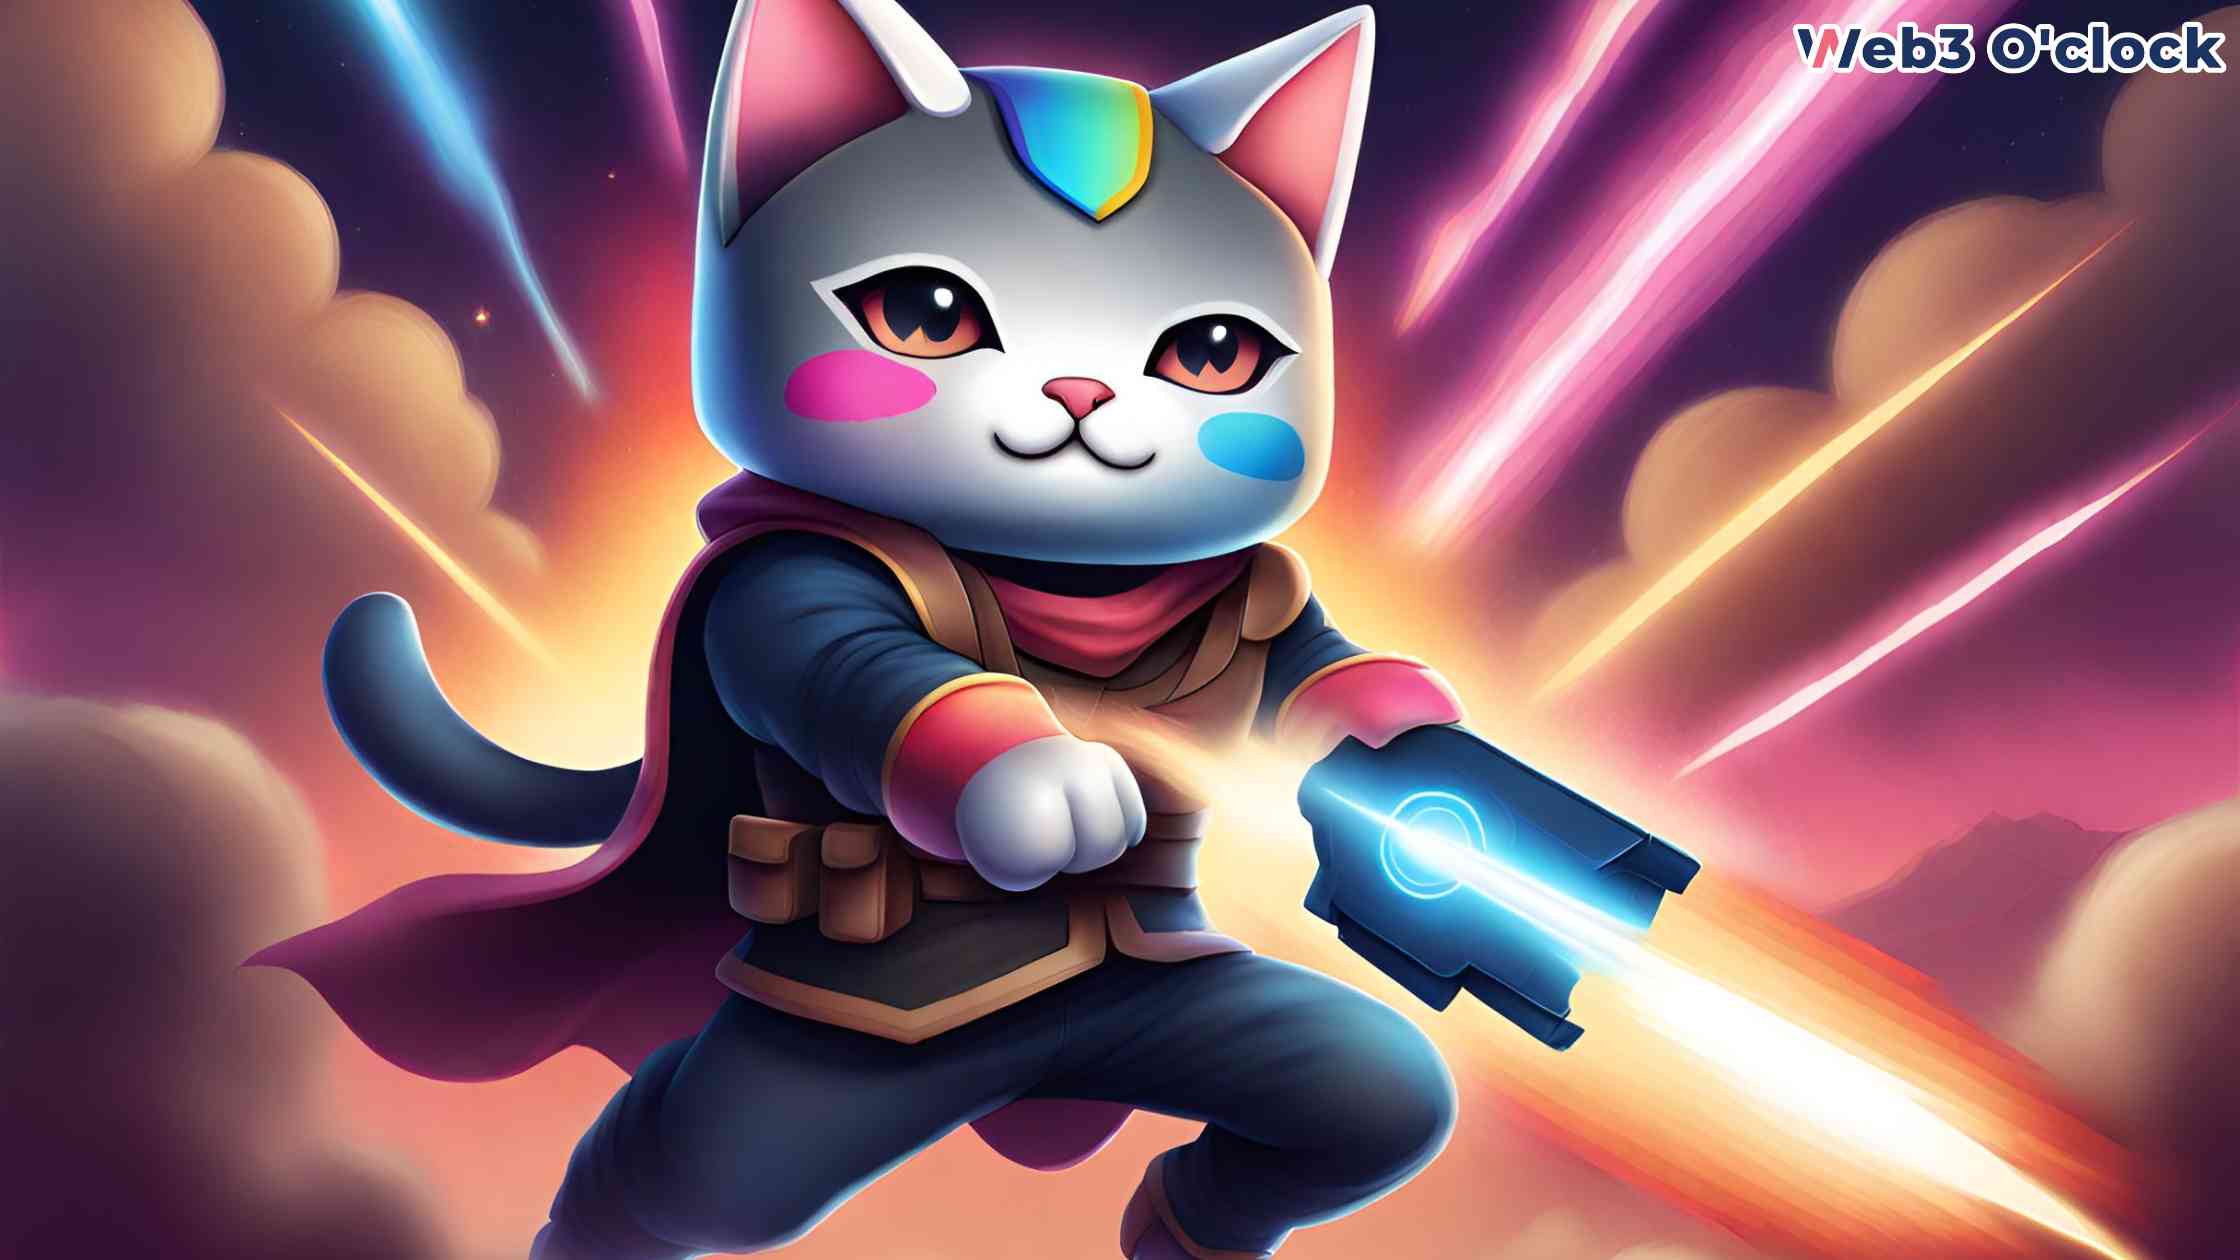 9 Lives Interactive Raises funds for Nyan Heroes by Web3 O'Clock